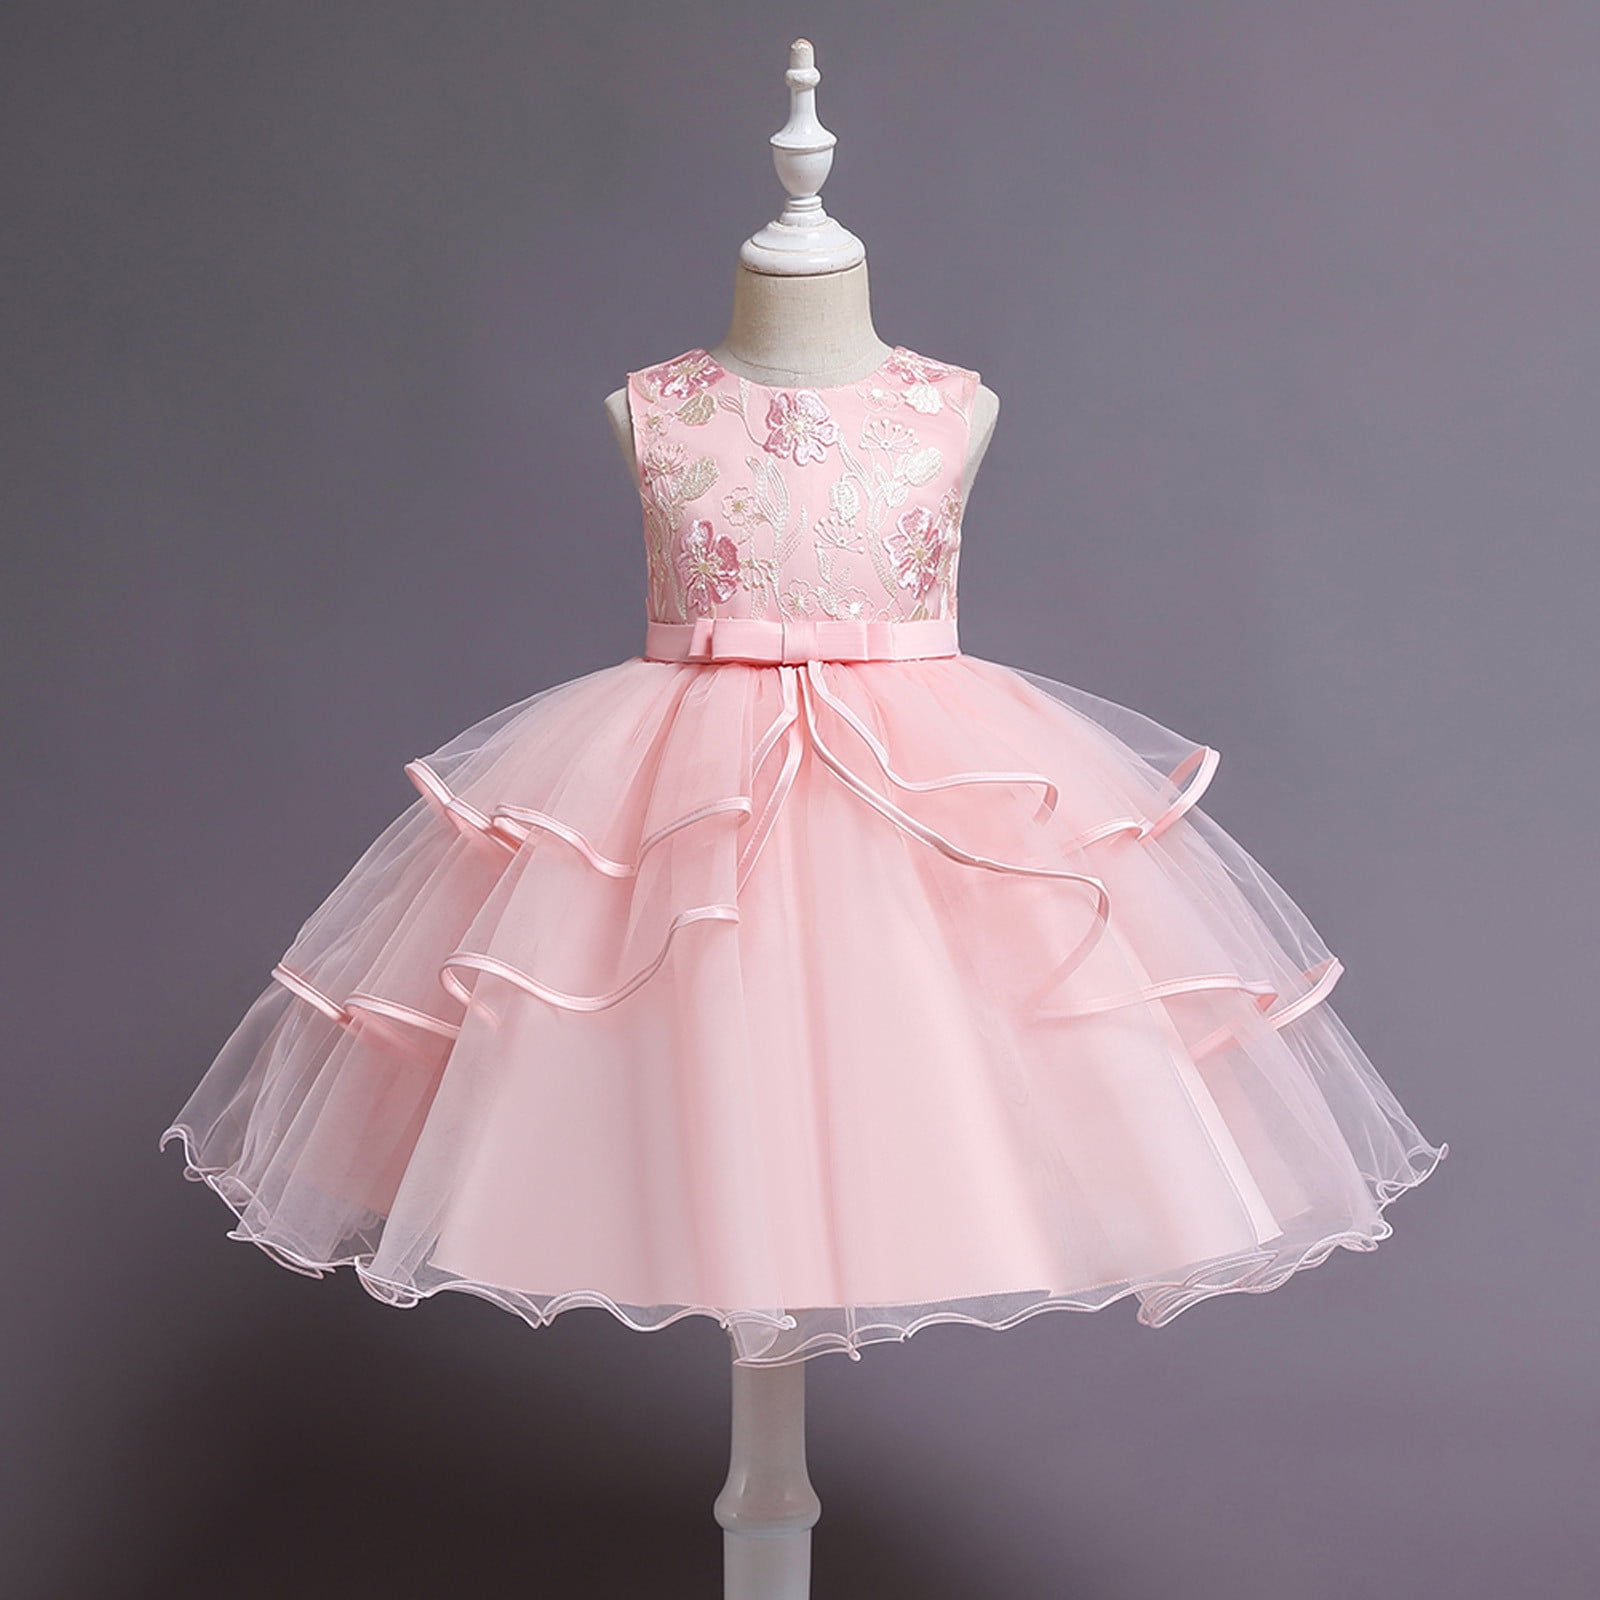 Female Designer Princess Party Dress, Size: Over 8 years medium or large at  Rs 1100 in Delhi